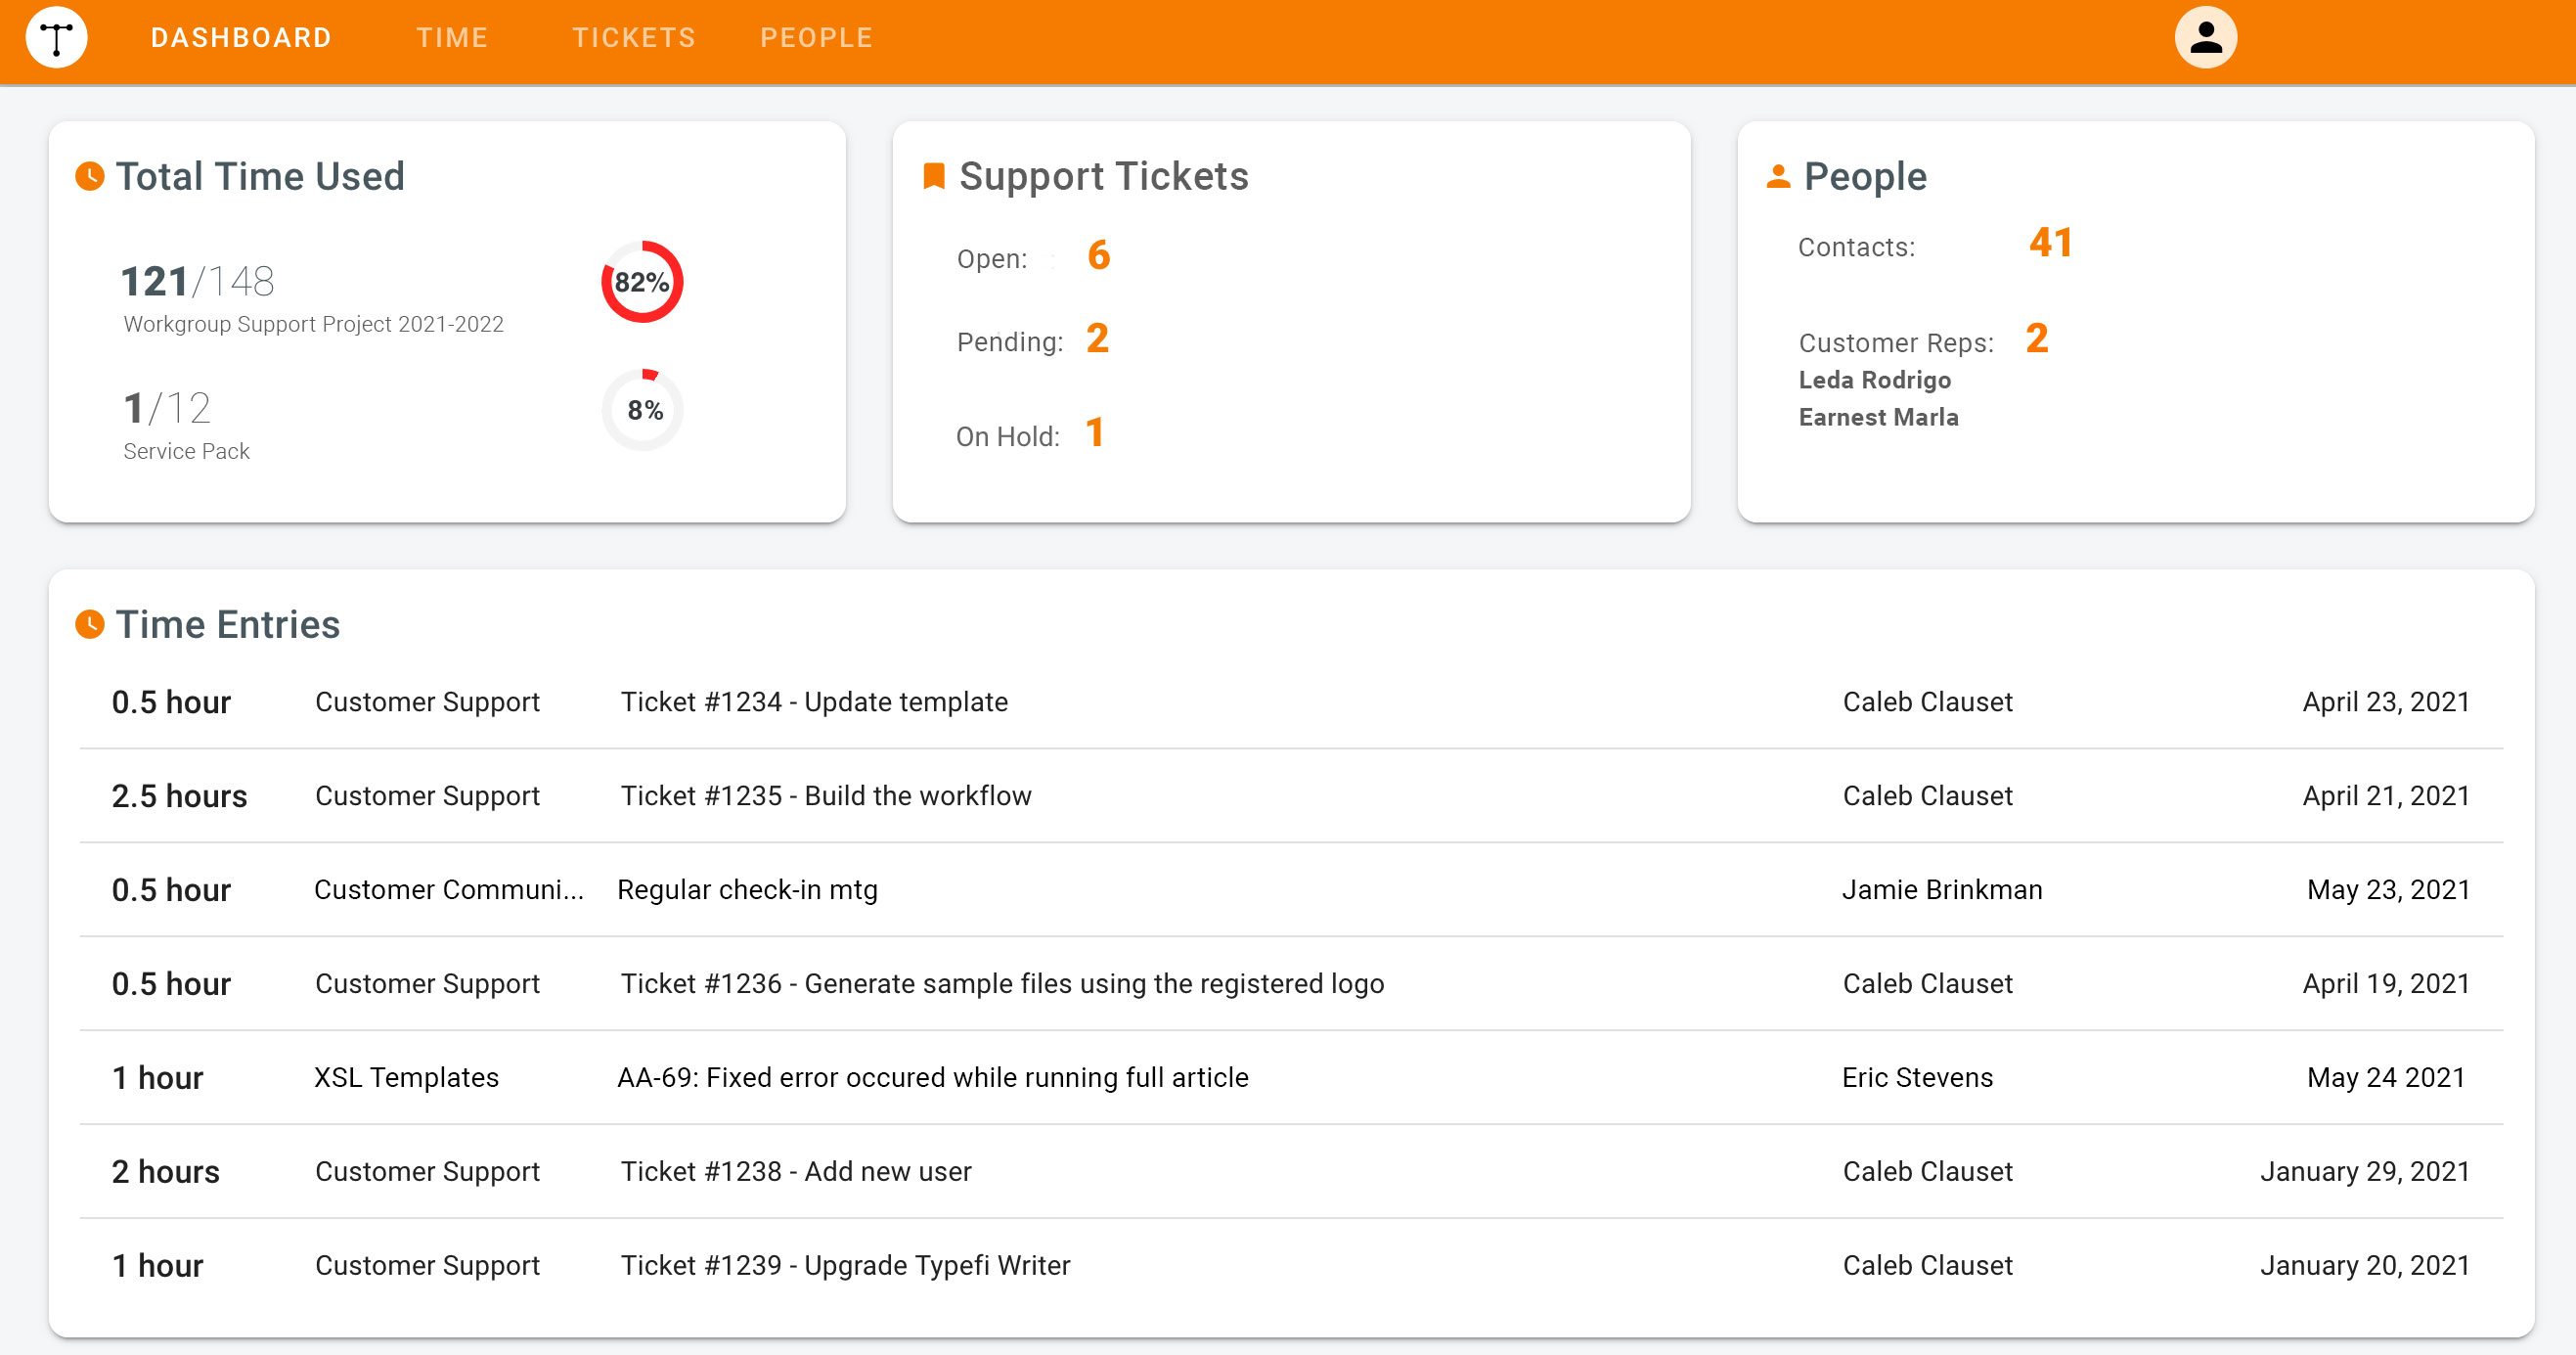 A screenshot of the My Typefi dashboard for Typefi. This screen shows the total time used, support tickets and Typefi users.